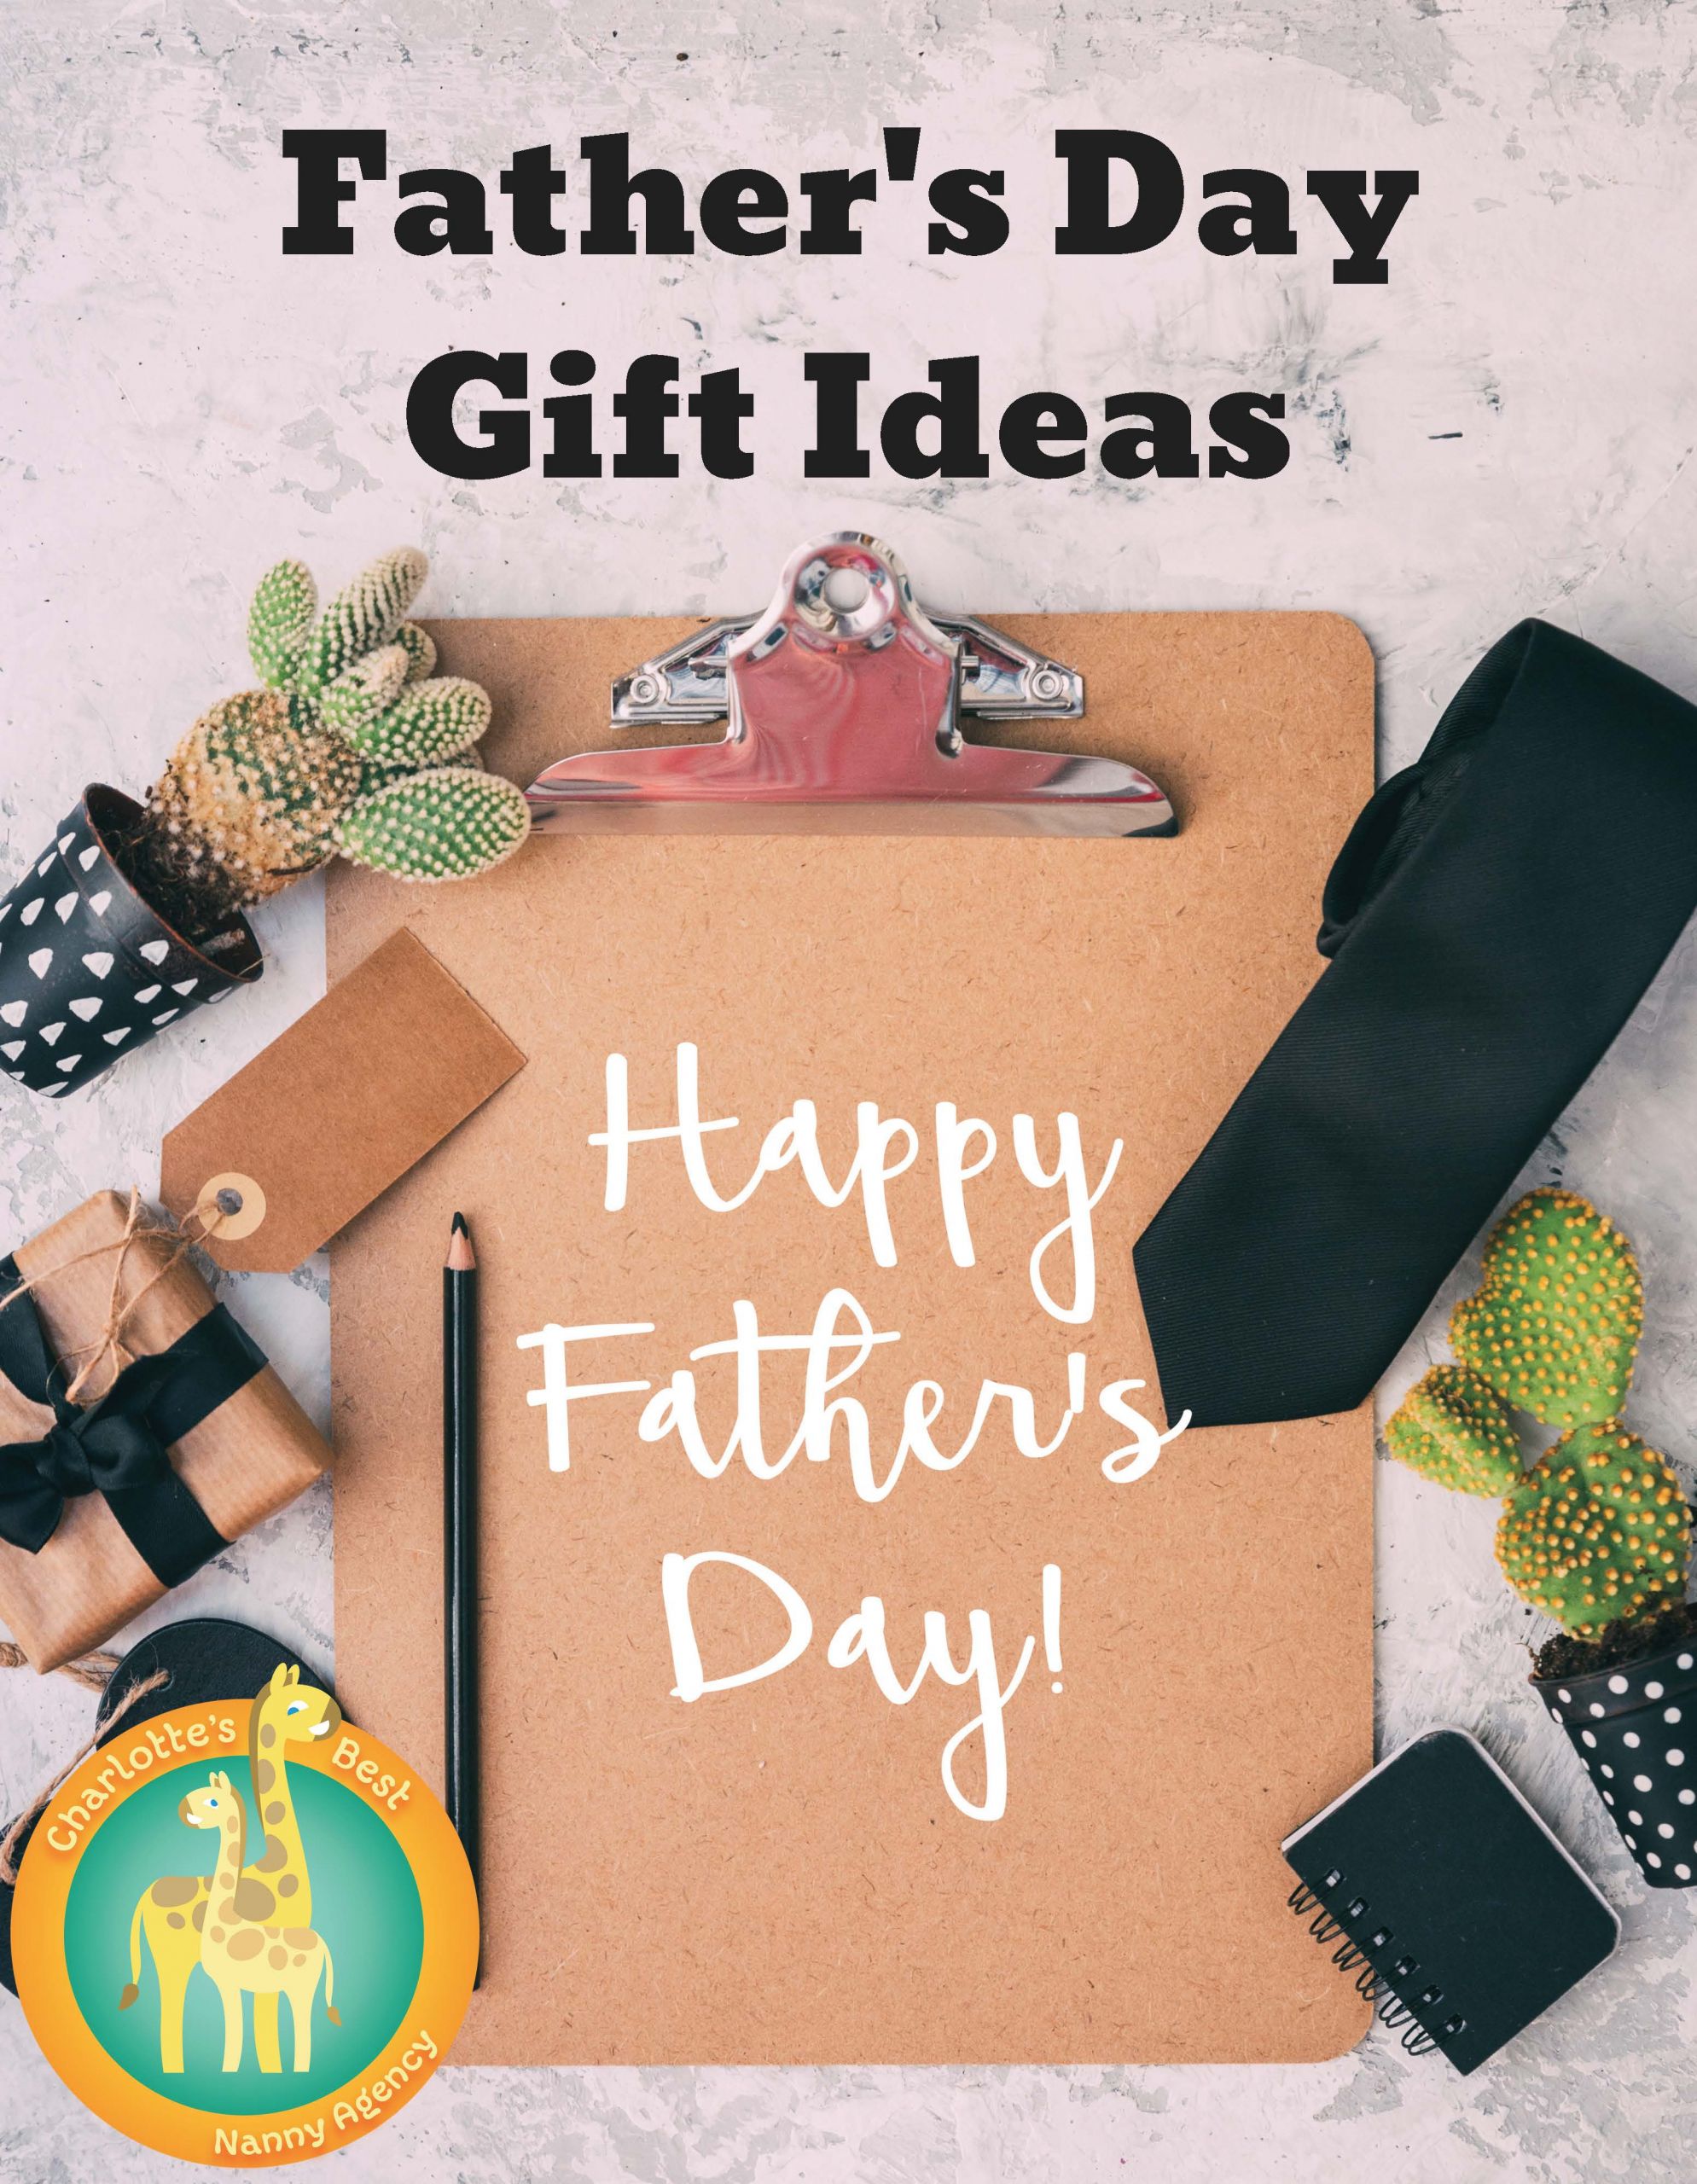 Fathers Day Gifts Ideas
 Father’s Day Gift Ideas Charlotte s Best Nanny Agency